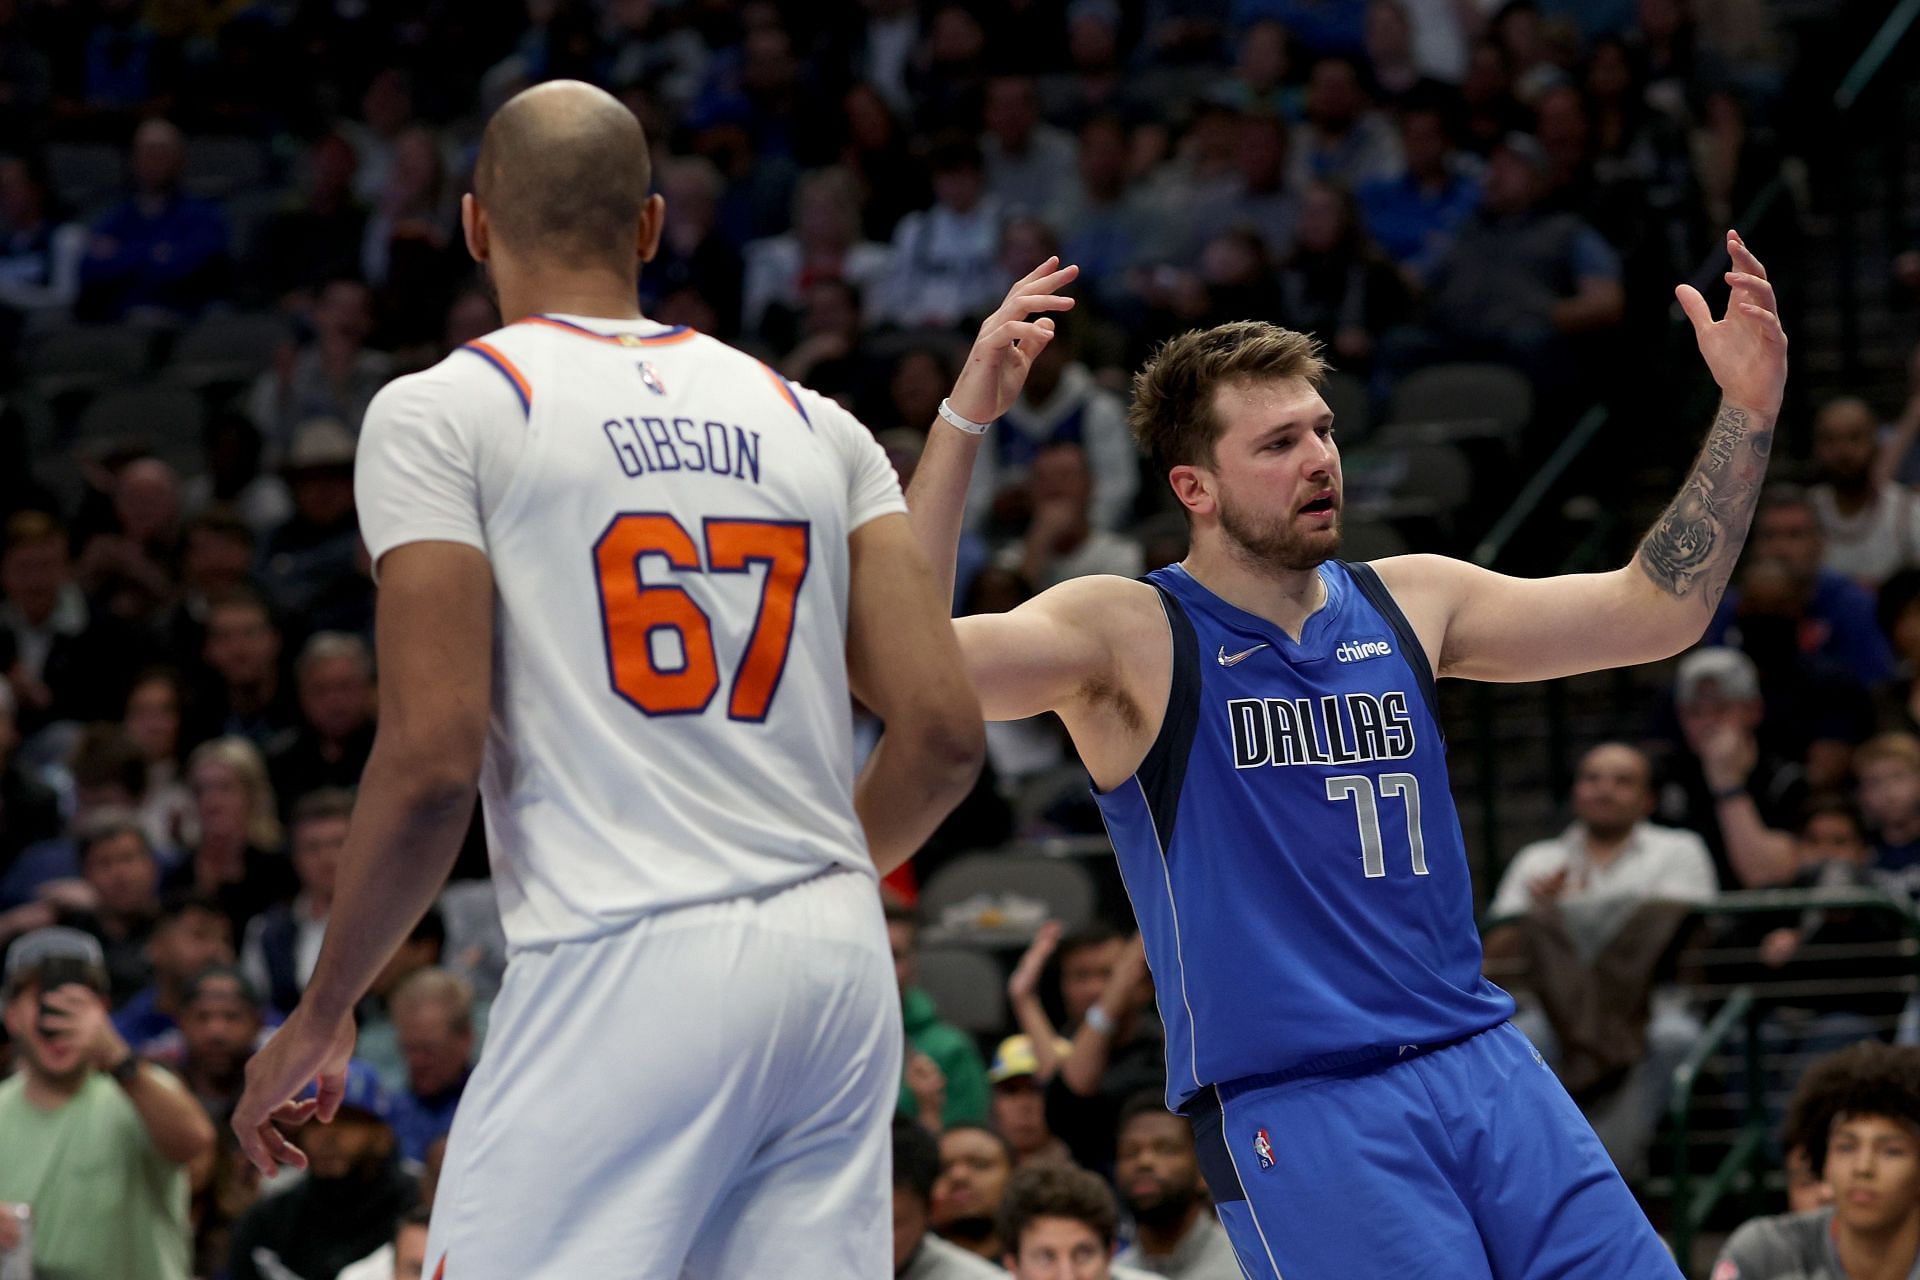 Luka Doncic of the Dallas Mavericks against the New York Knicks.